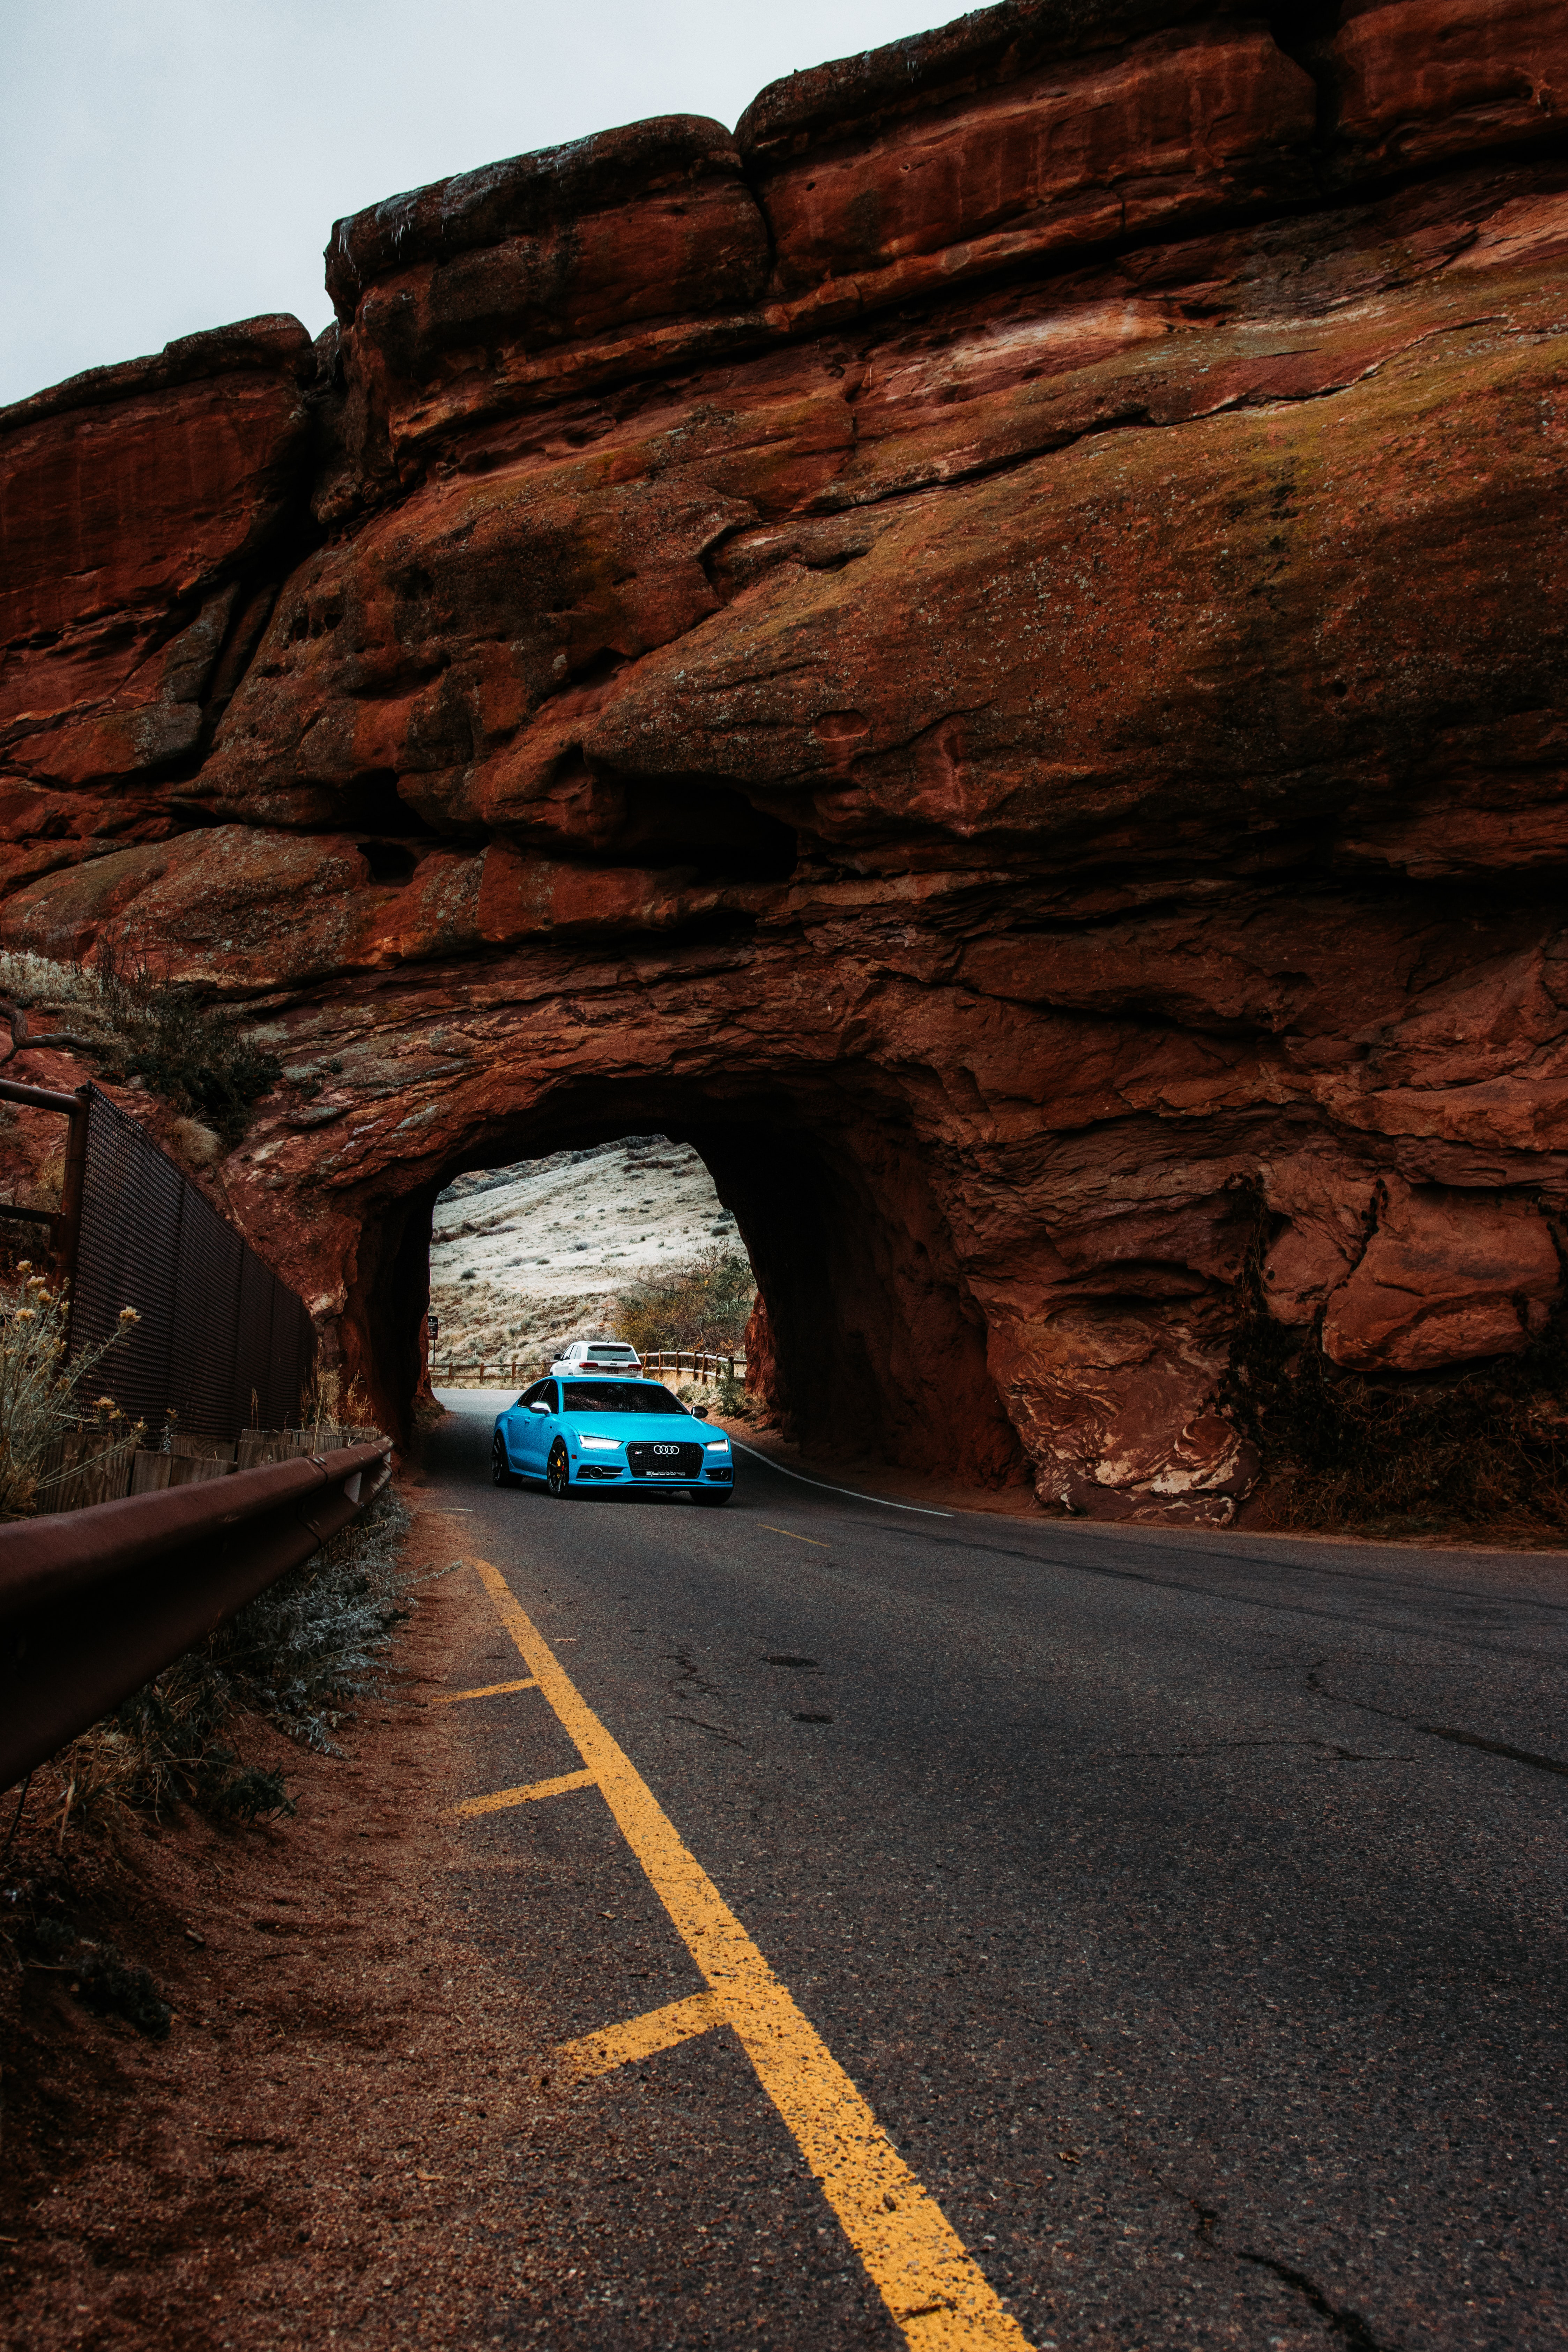 Widescreen image road, cars, tunnel, car